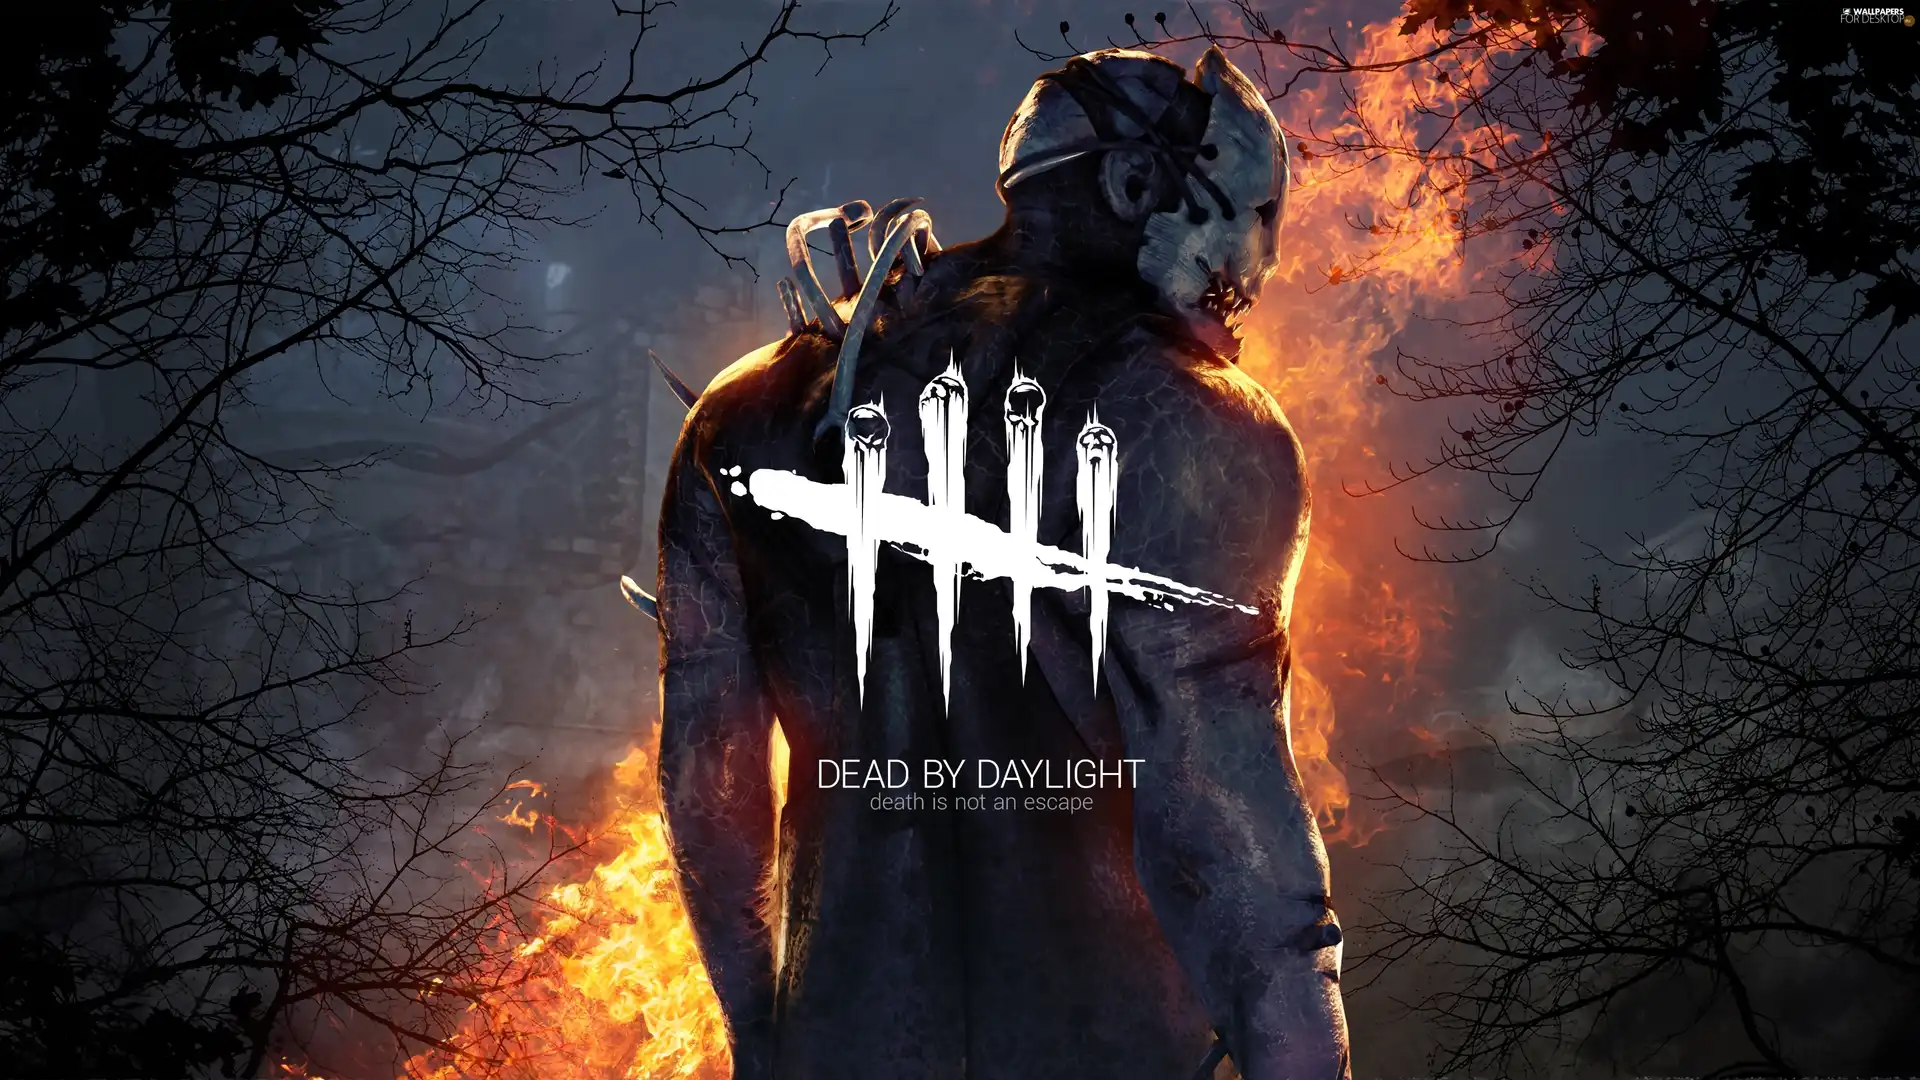 Mask, Big Fire, Dead by Daylight, a man, game